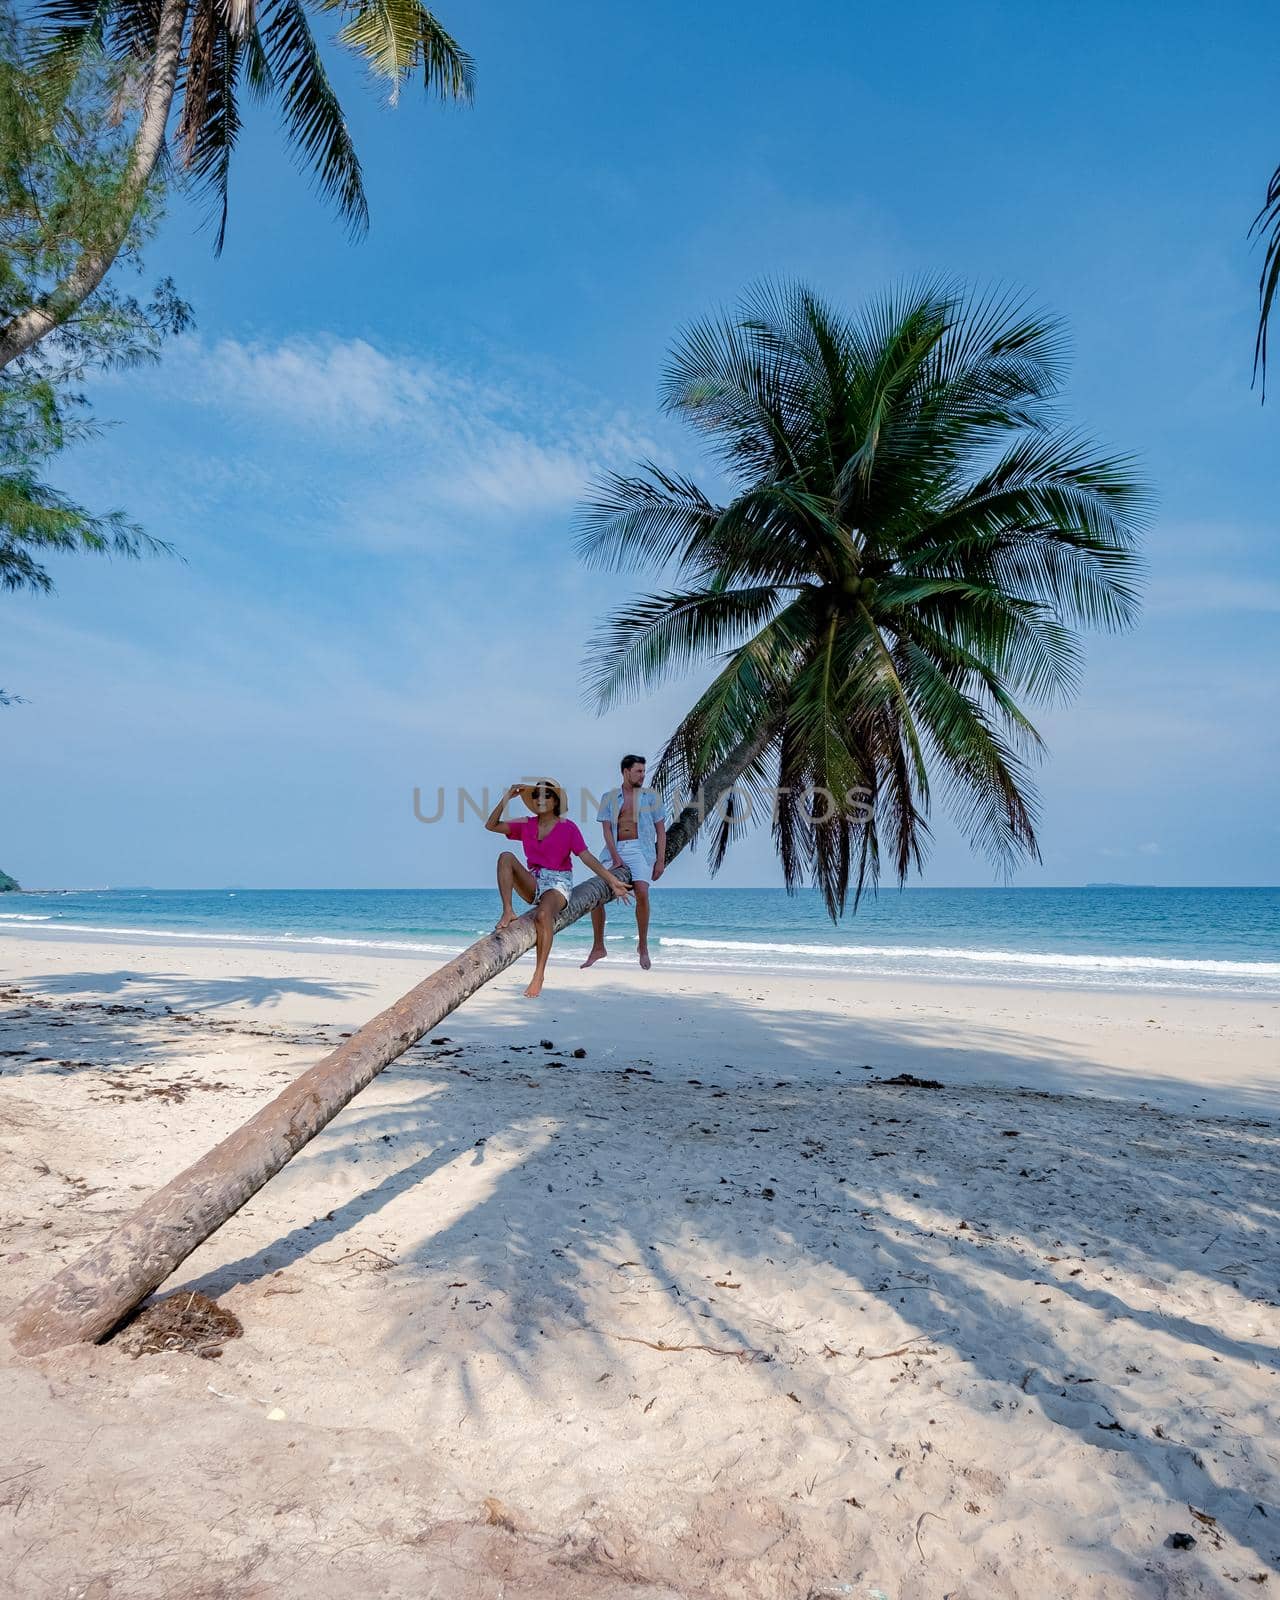 couple on vacation in Thailand, Chumpon province , white tropical beach with palm trees, Wua Laen beach Chumphon area Thailand, palm tree hanging over the beach with couple on vacation in Thailand by fokkebok